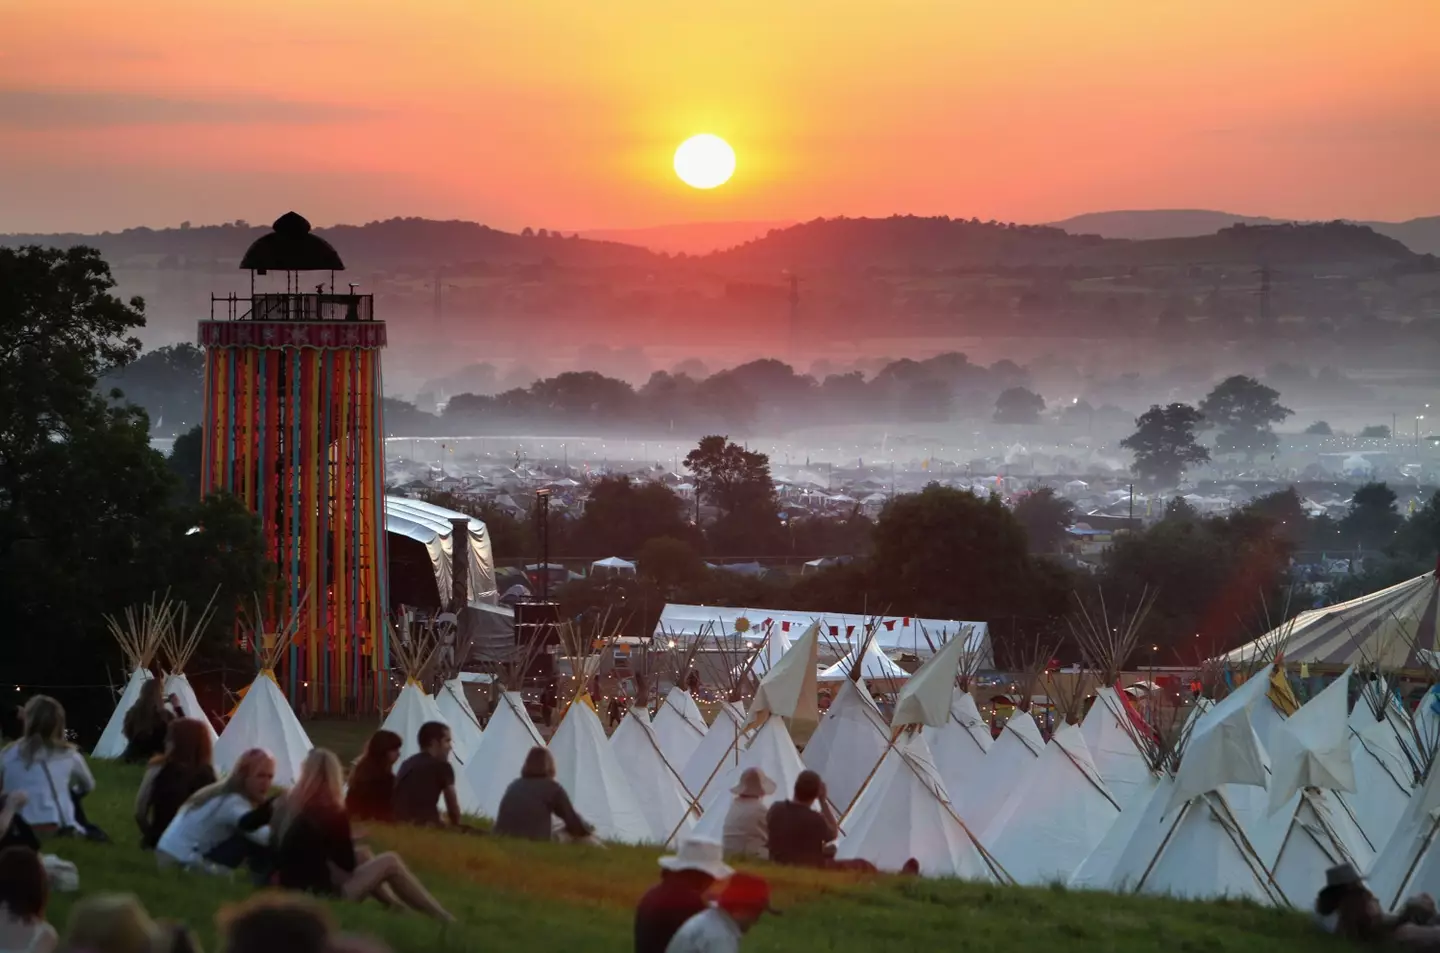 Securing a ticket to Glastonbury is extremely difficult. (Matt Cardy/Getty Images)